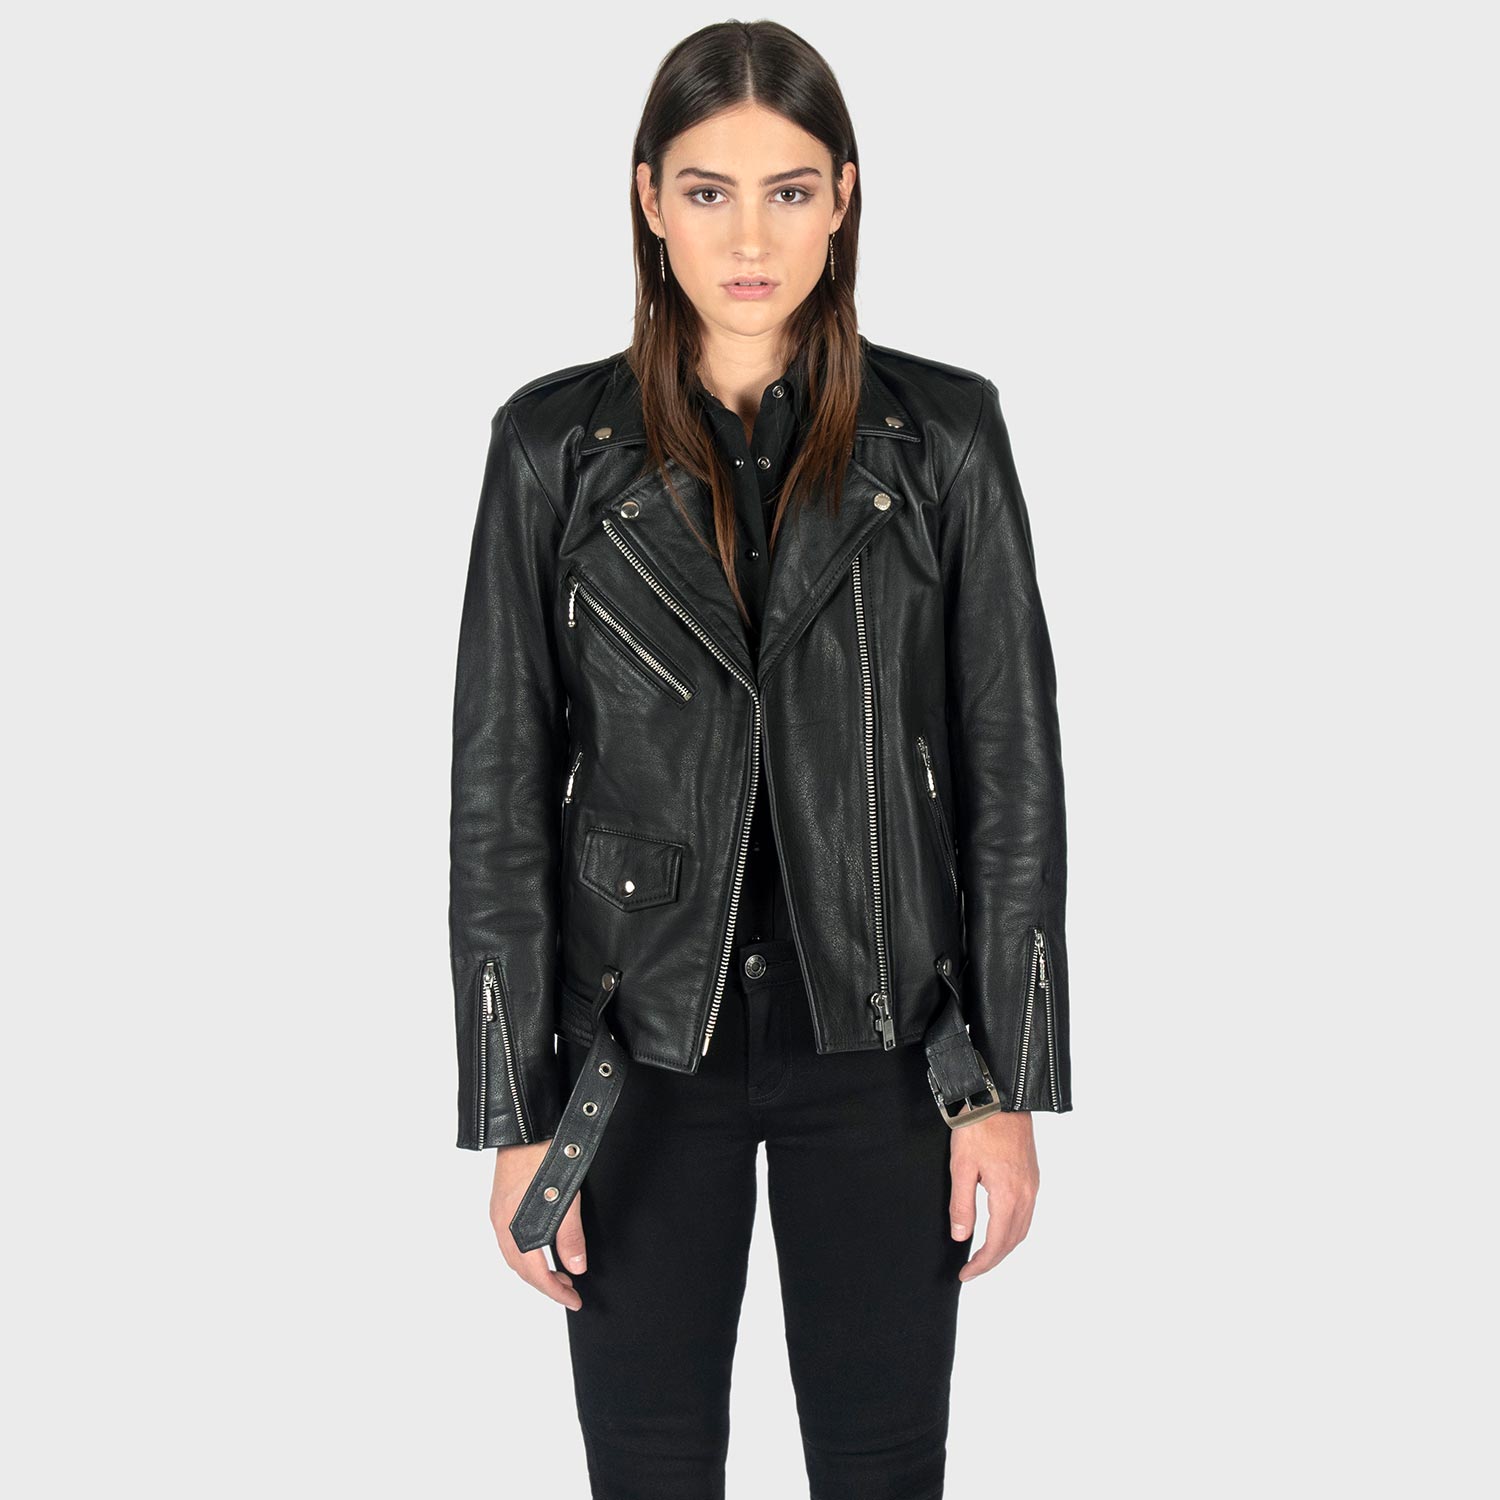 Oversized and Jacket Straight To Black - Apparel Hell Nickel Leather | Commando